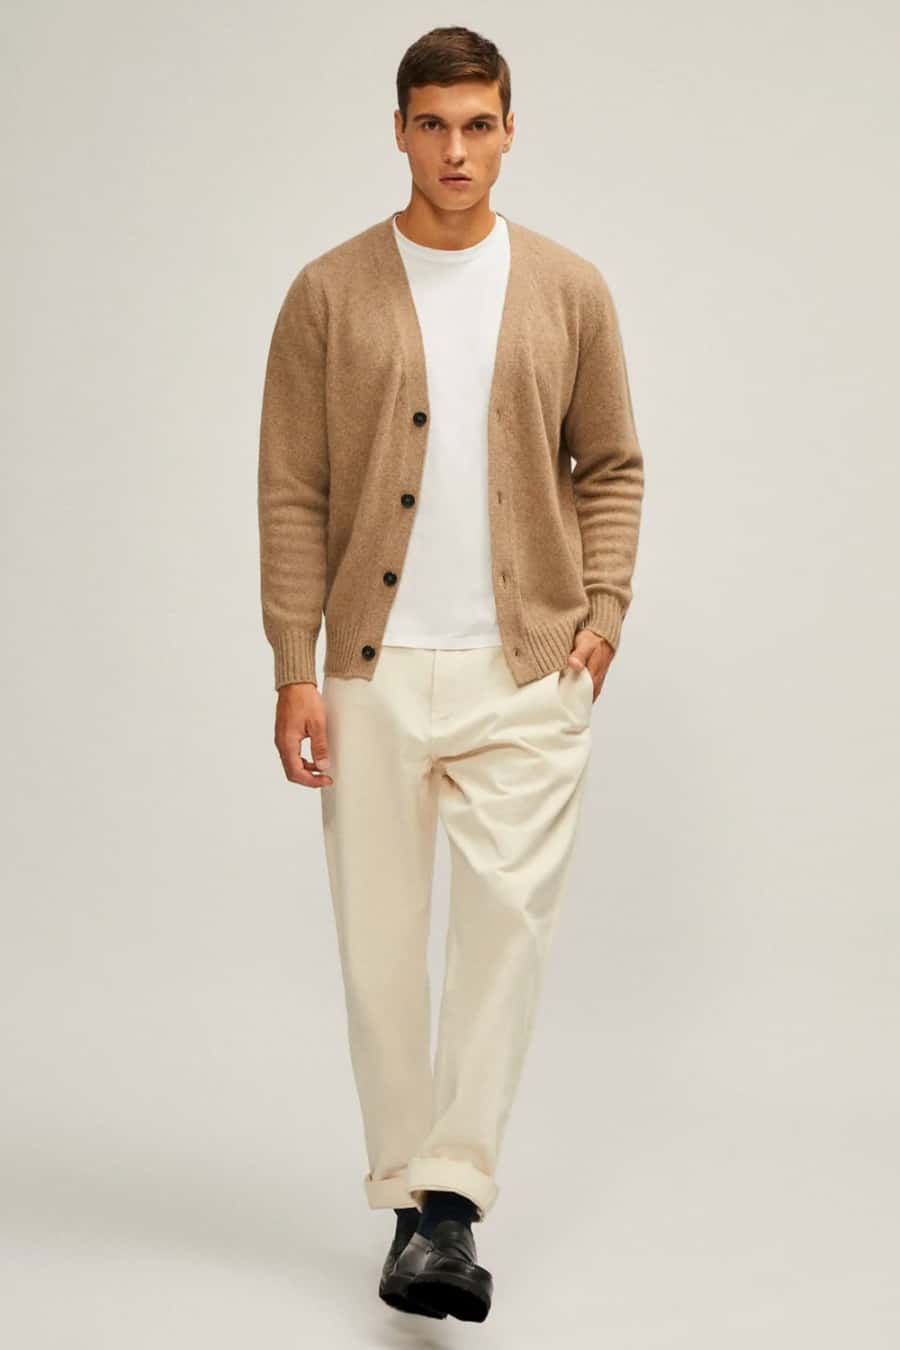 Men's cream chinos, white T-shirt, camel cardigan and black loafers outfit